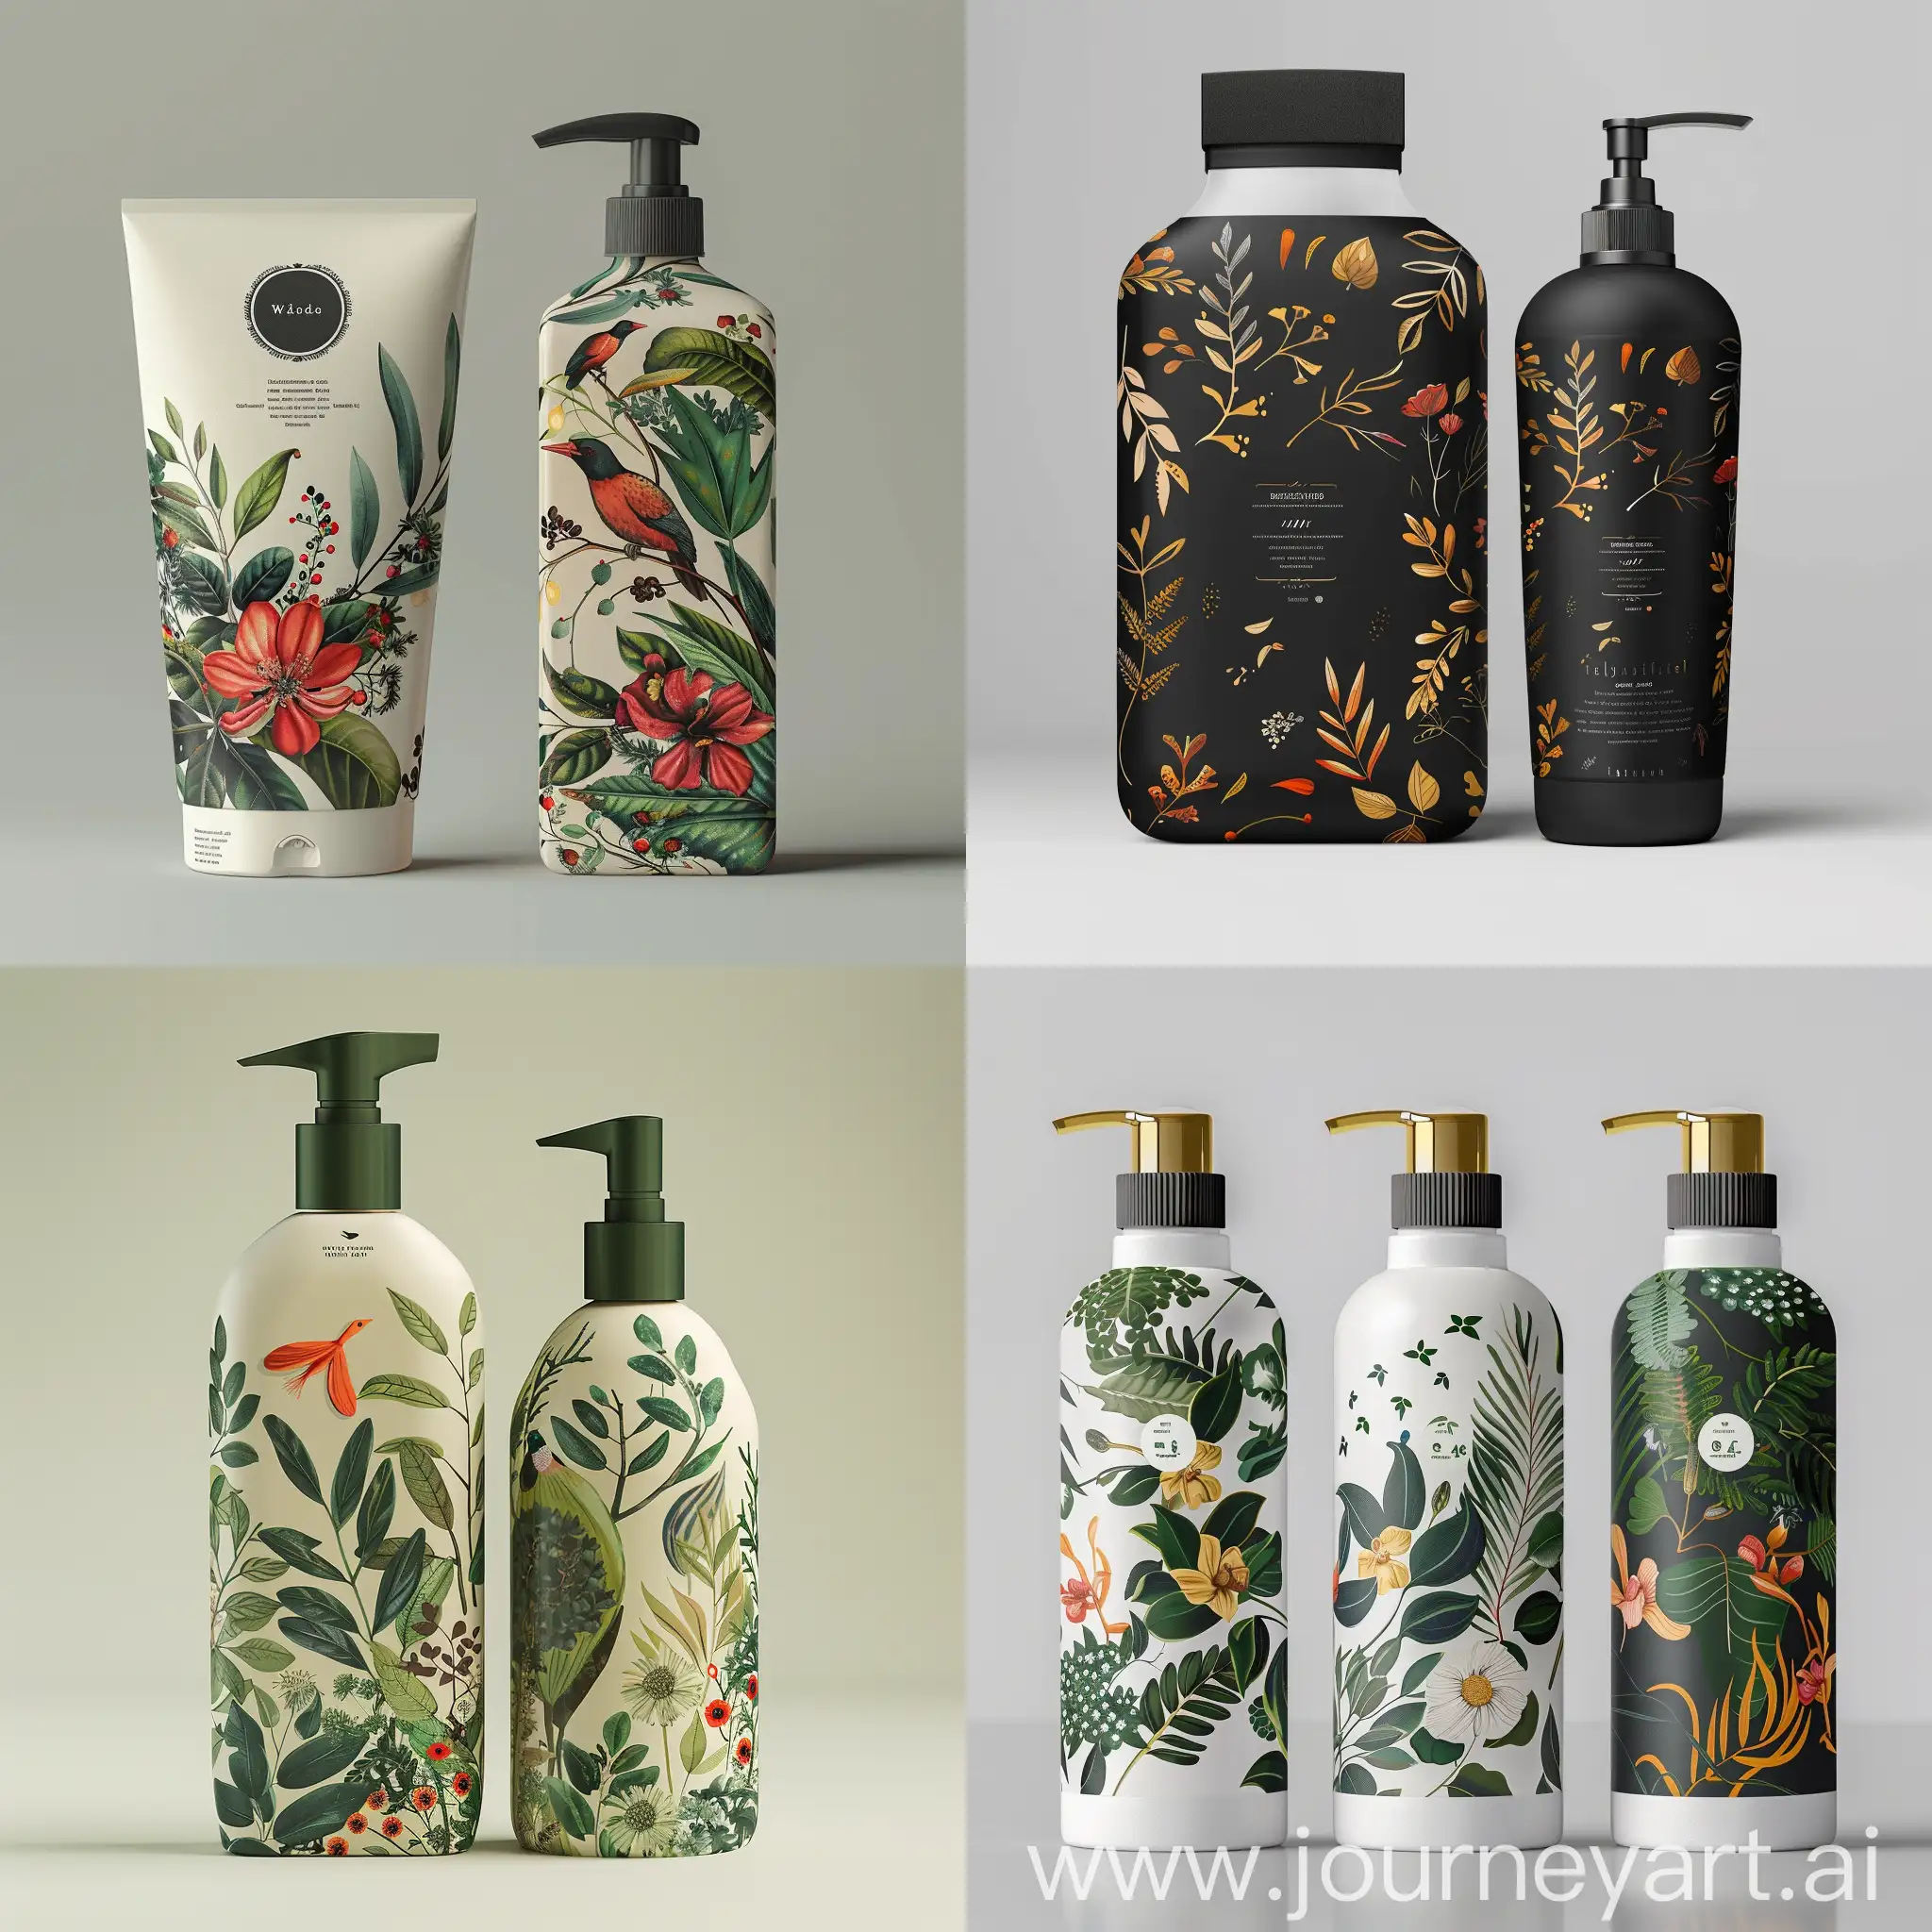 packaging for gel shower and shampoo premium class with nature way, modern graphic style